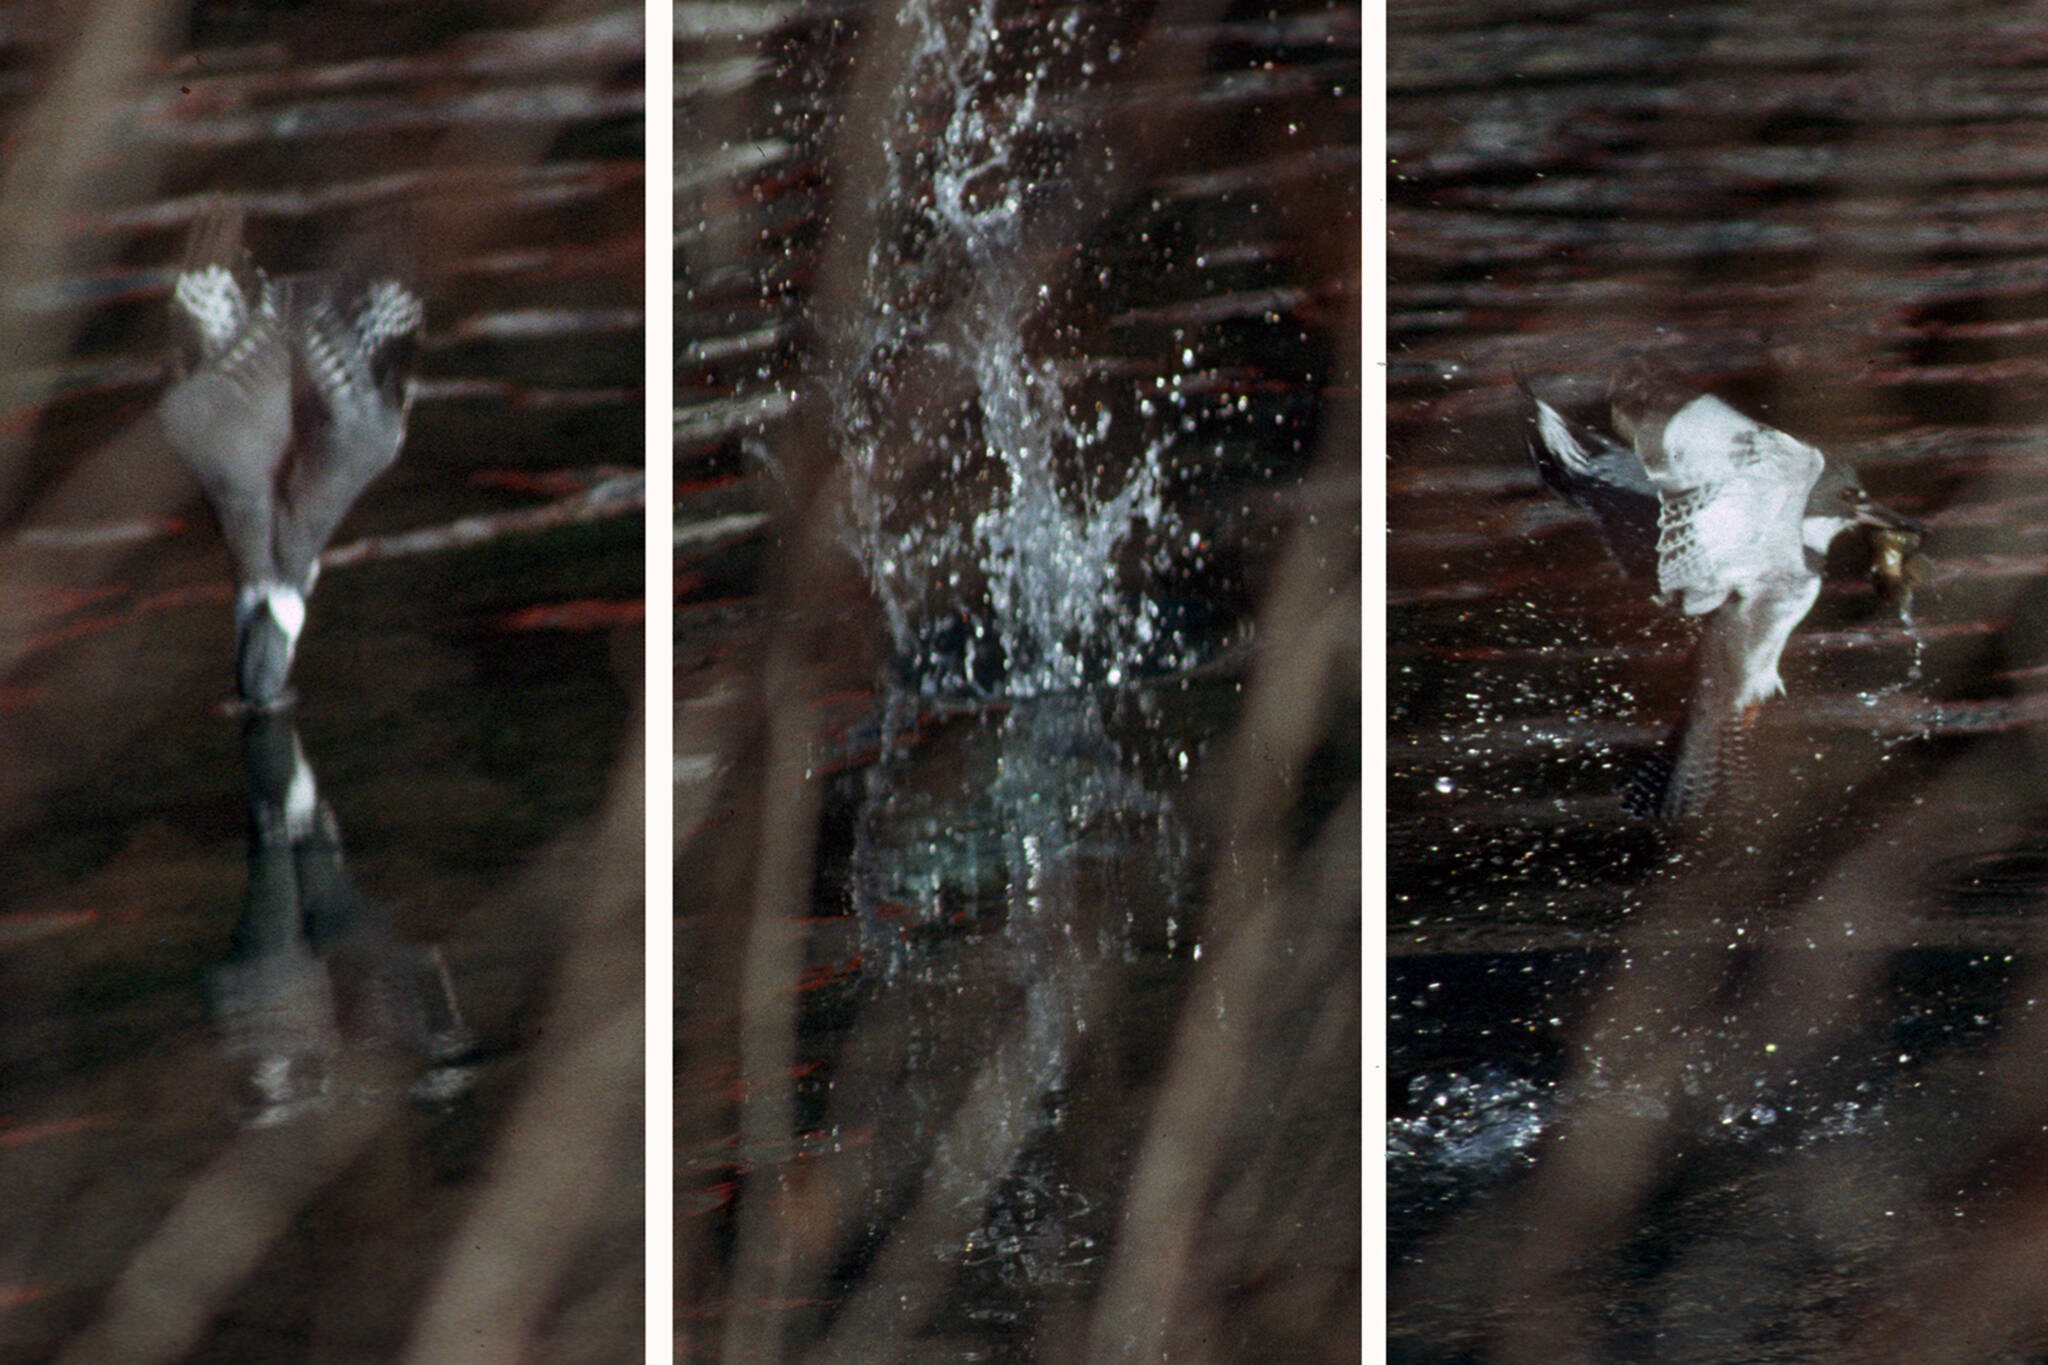 A kingfisher’s diving sequence: a headfirst plunge with wings folded, splash, airborne again. (Courtesy Photo / Bob Armstrong)